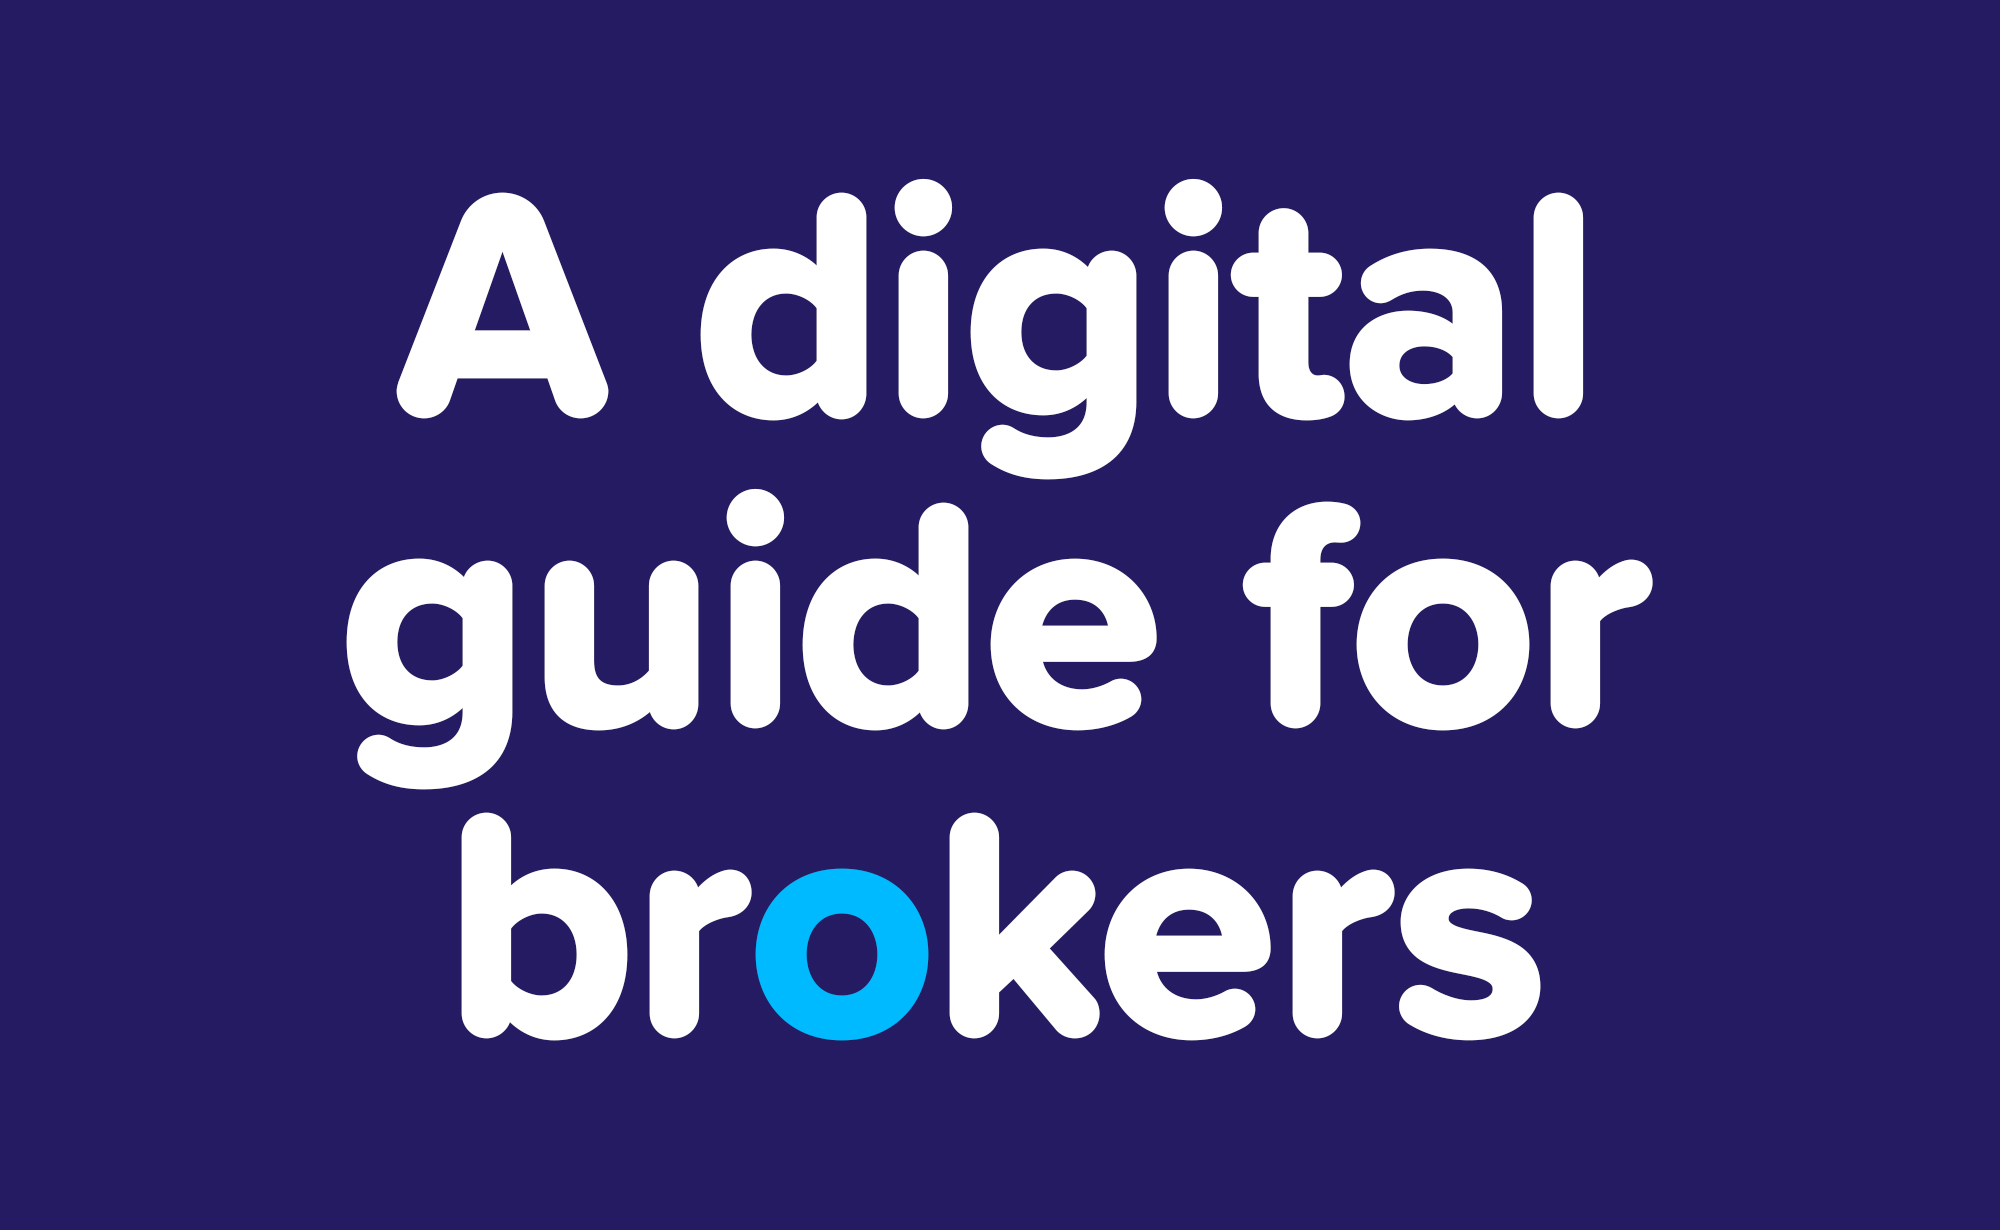 A digital guide for brokers